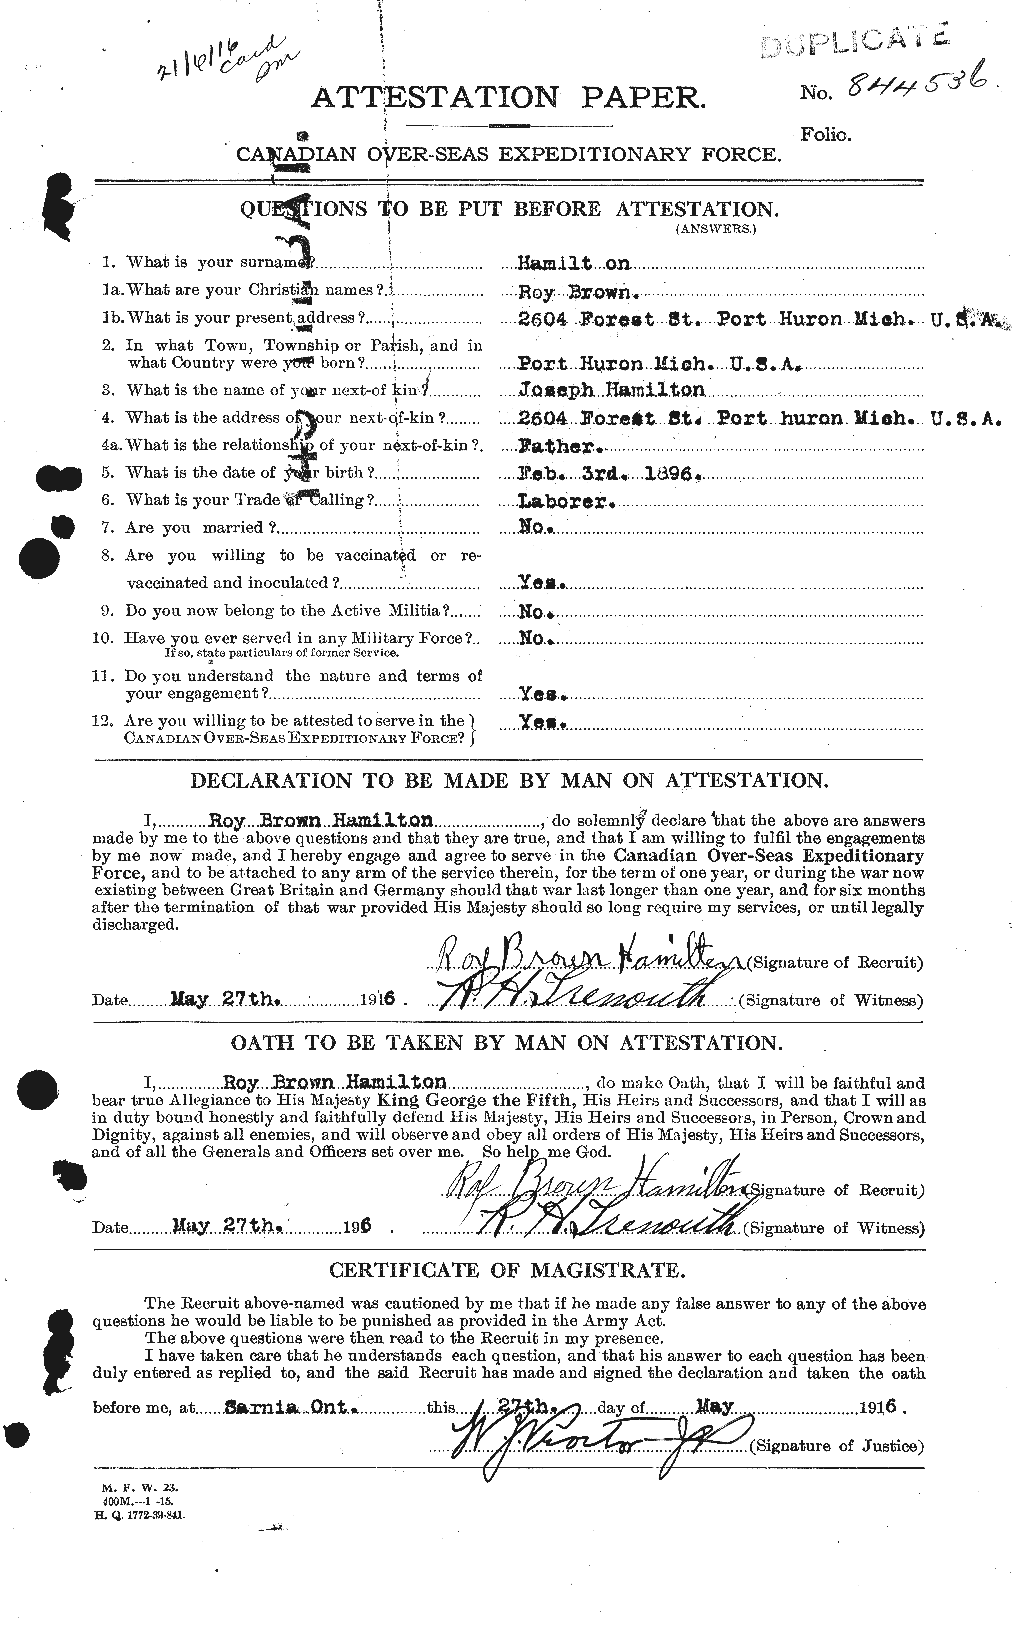 Personnel Records of the First World War - CEF 373288a